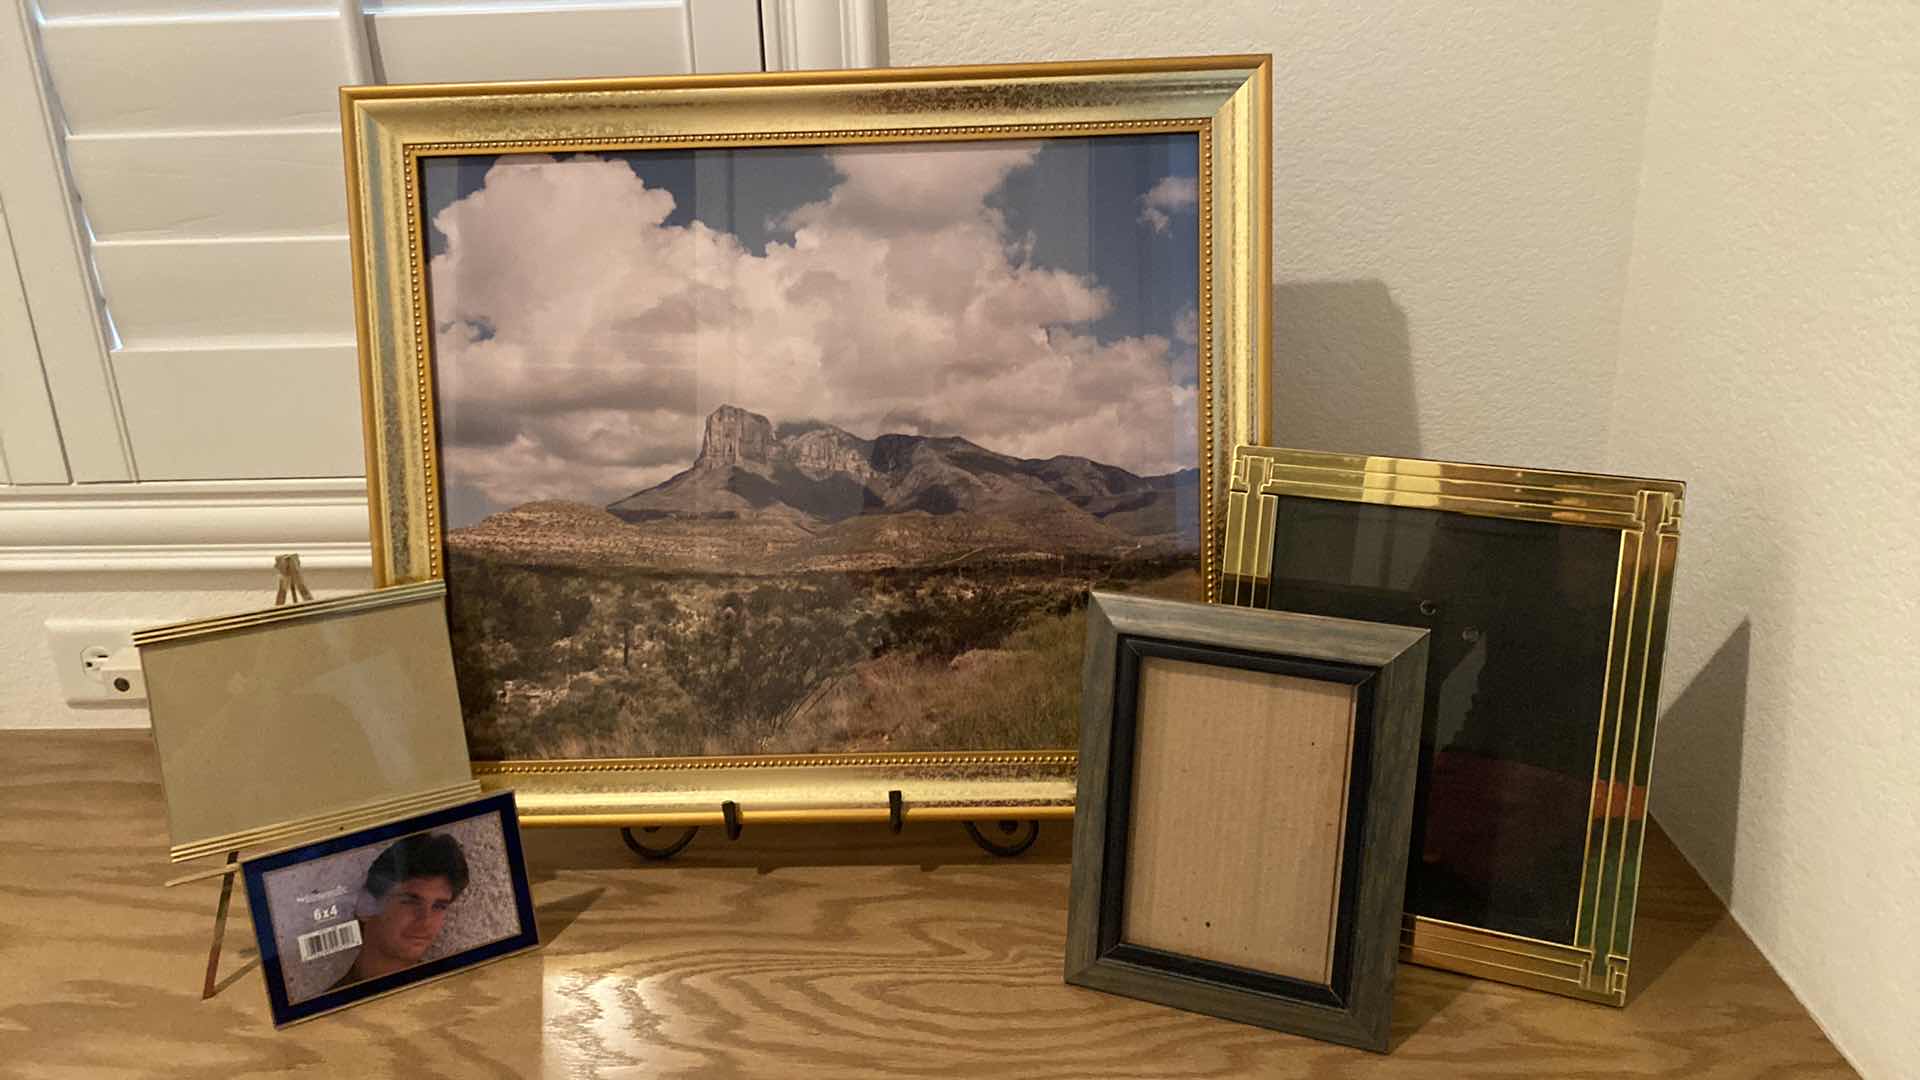 Photo 1 of GOLD FRAMED PHOTO OF DESERT 23” x 19” INCLUDES STAND AND 4 PHOTO FRAMES